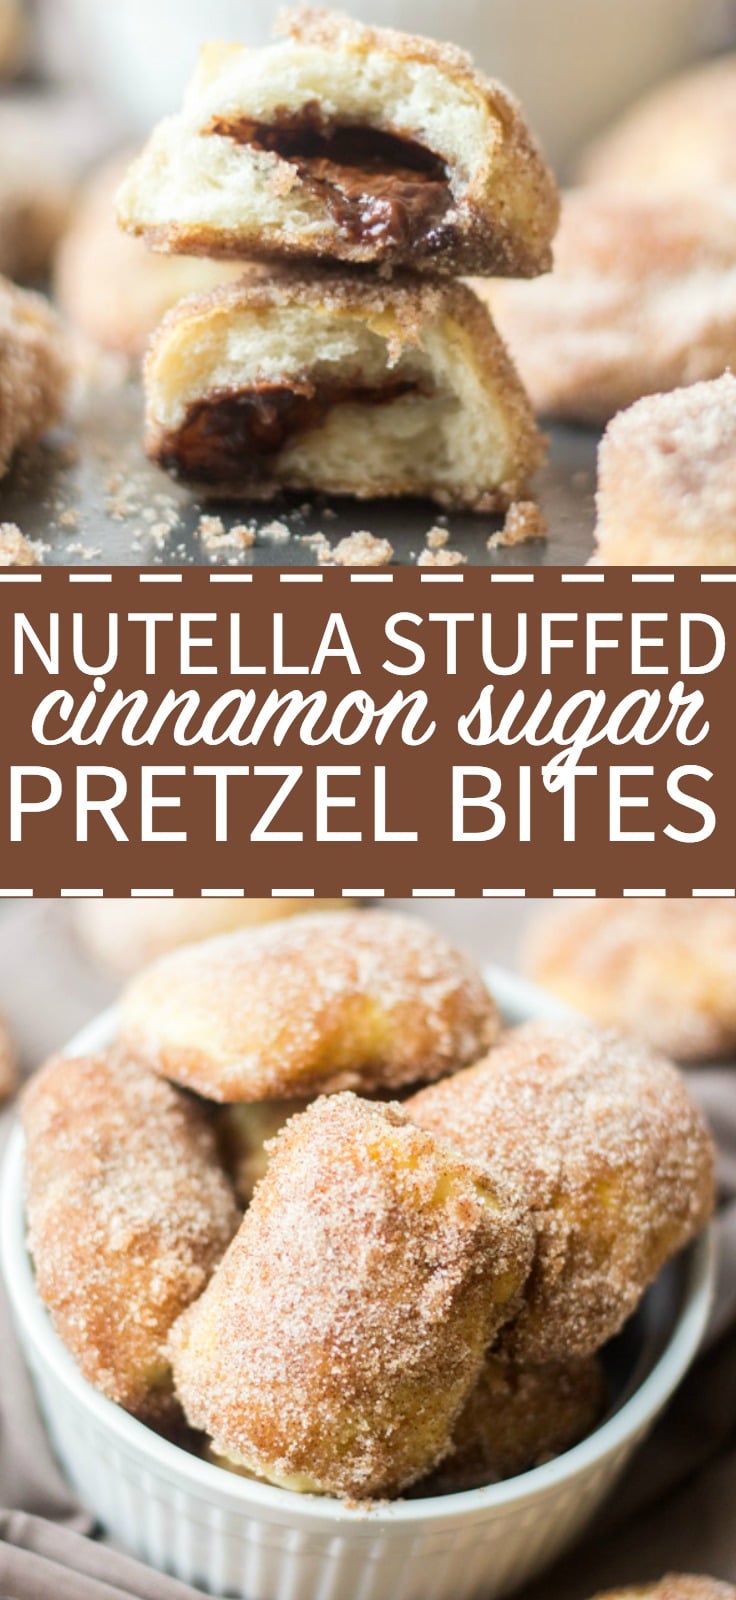 Soft and delicious, these cinnamon sugar pretzel bites are stuffed with nutella and are the perfect snack or dessert recipe for parties. 